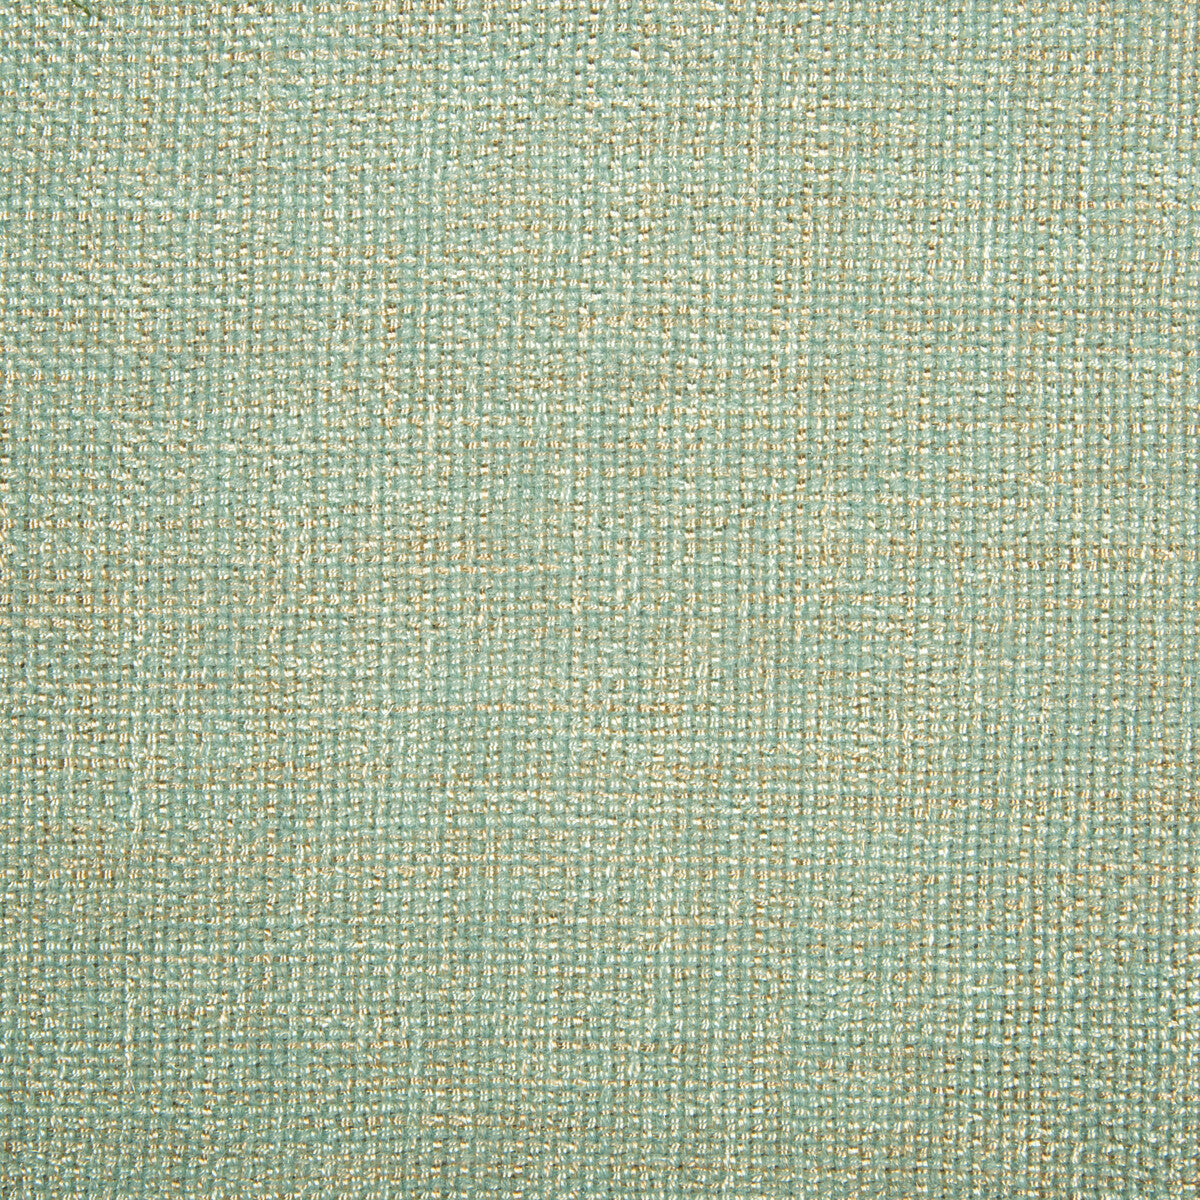 Kravet Contract fabric in 4458-1615 color - pattern 4458.1615.0 - by Kravet Contract